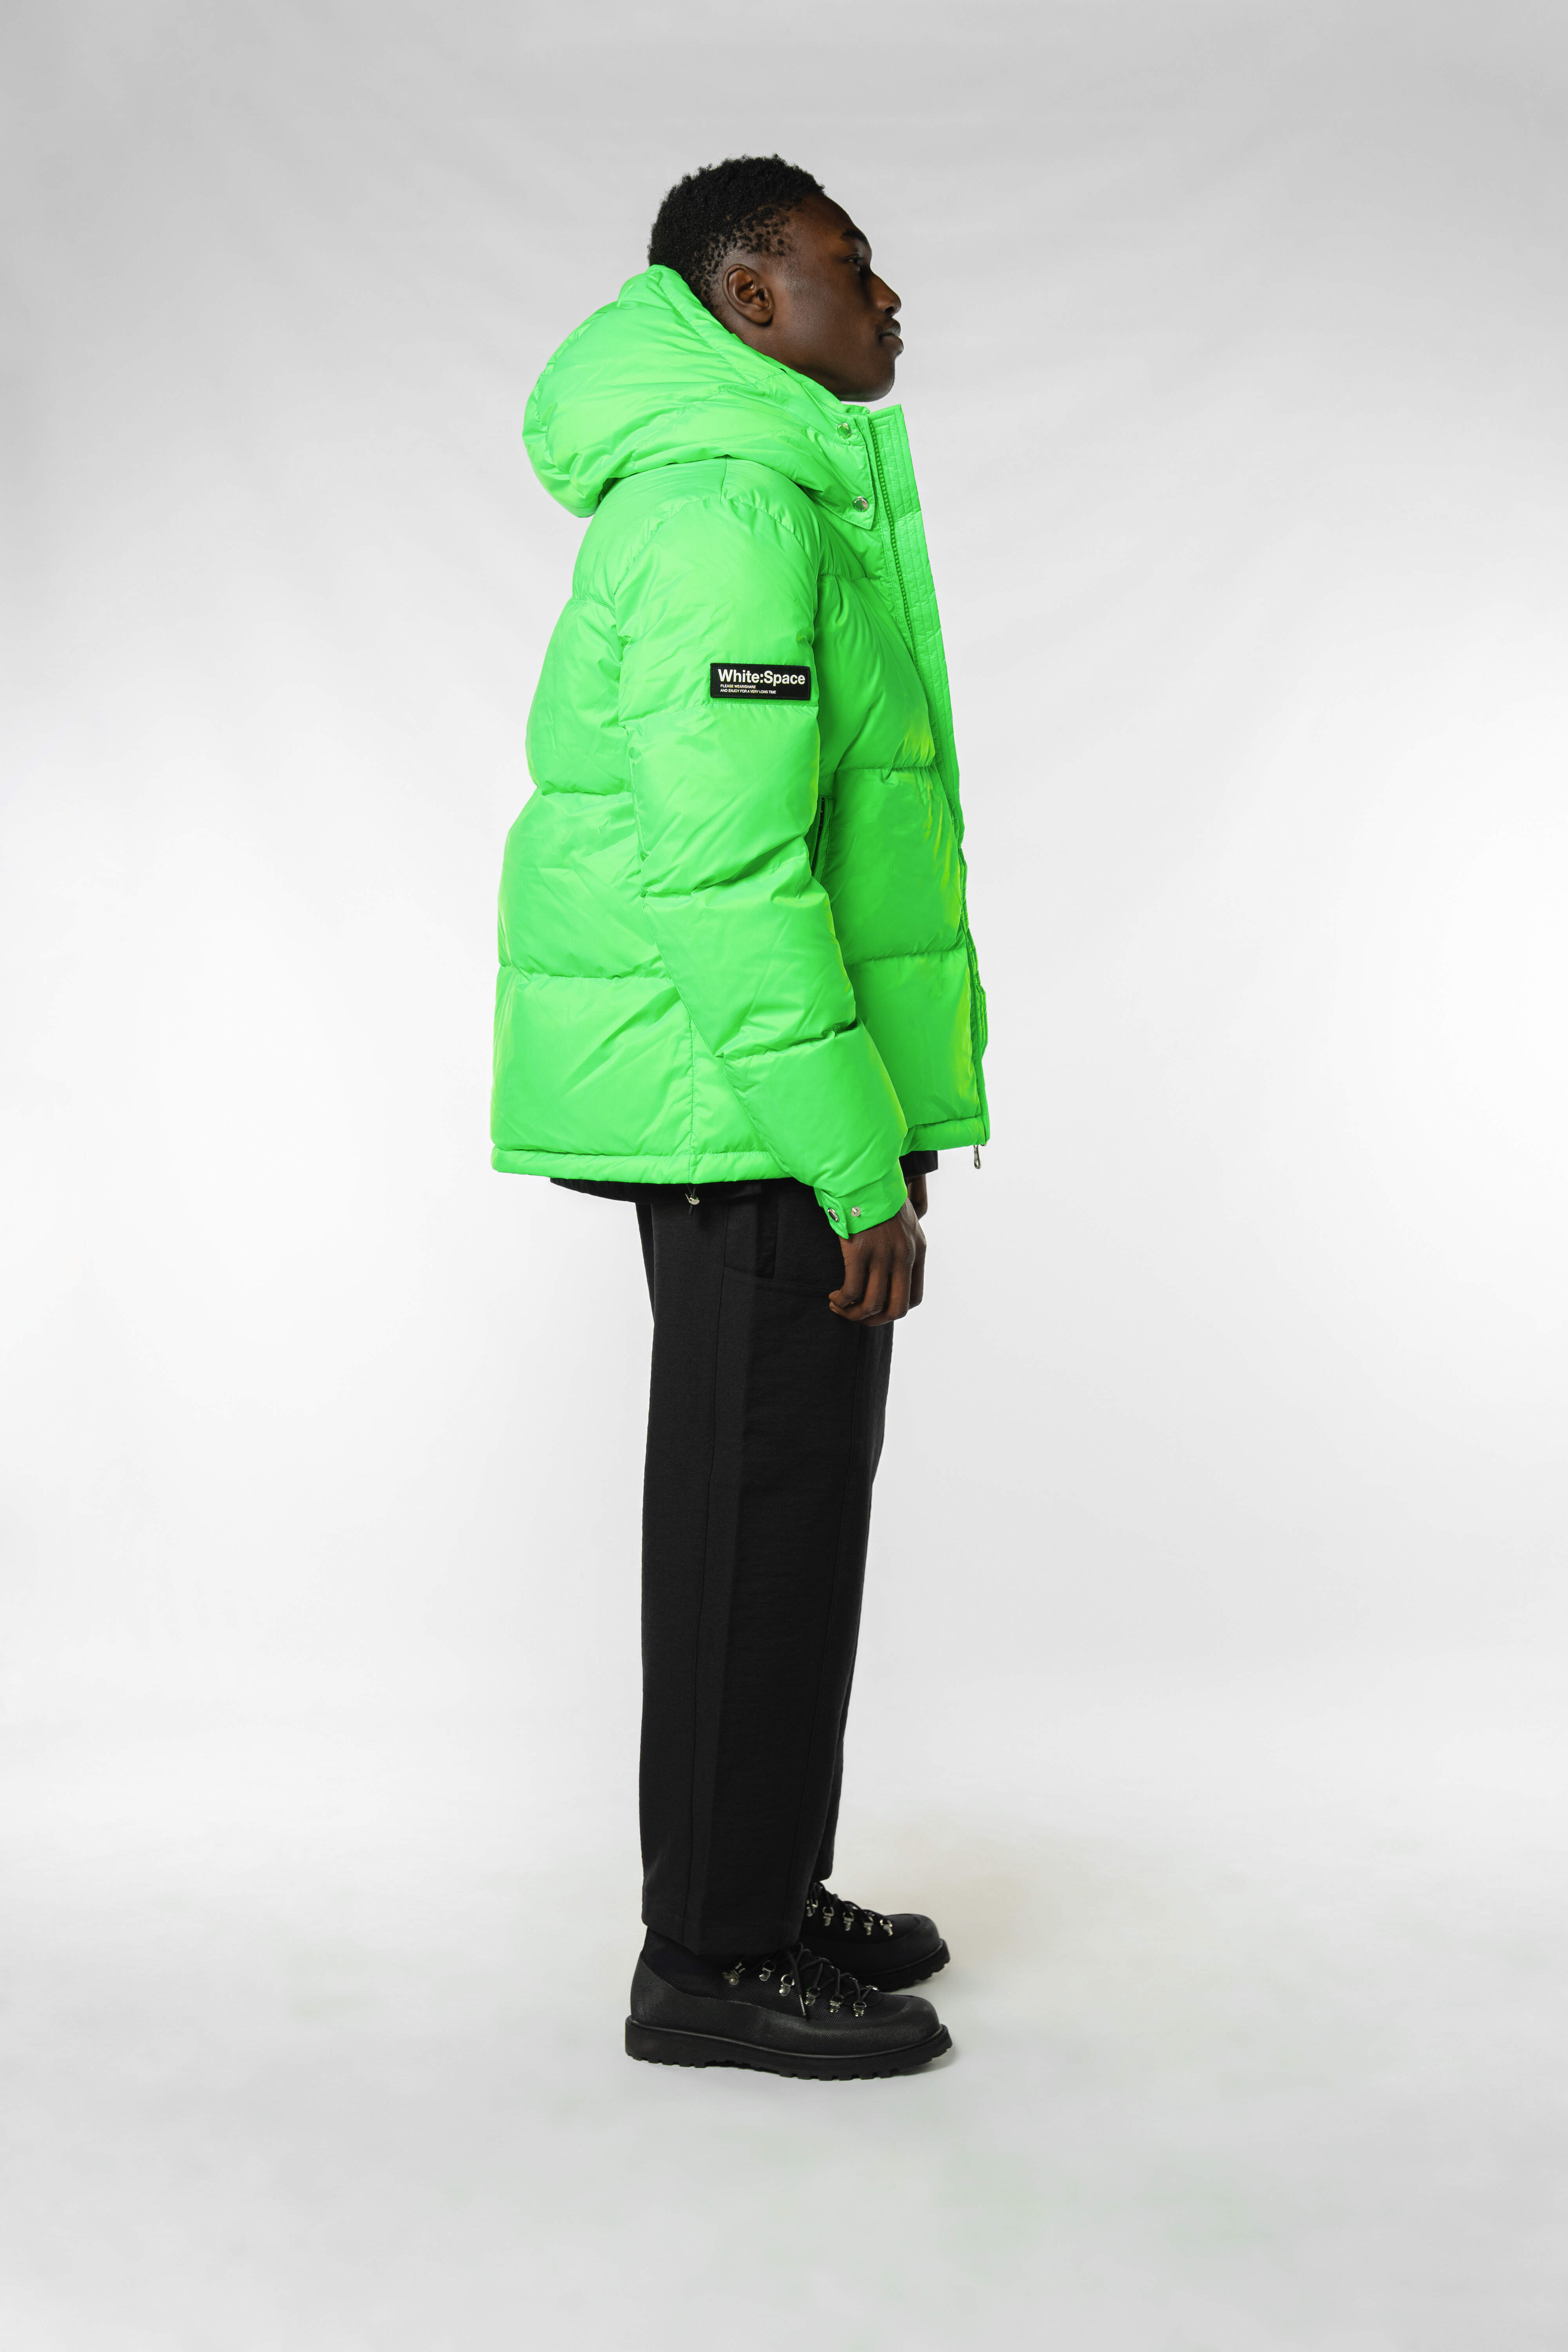 Scott Jacket Green - SOLD OUT